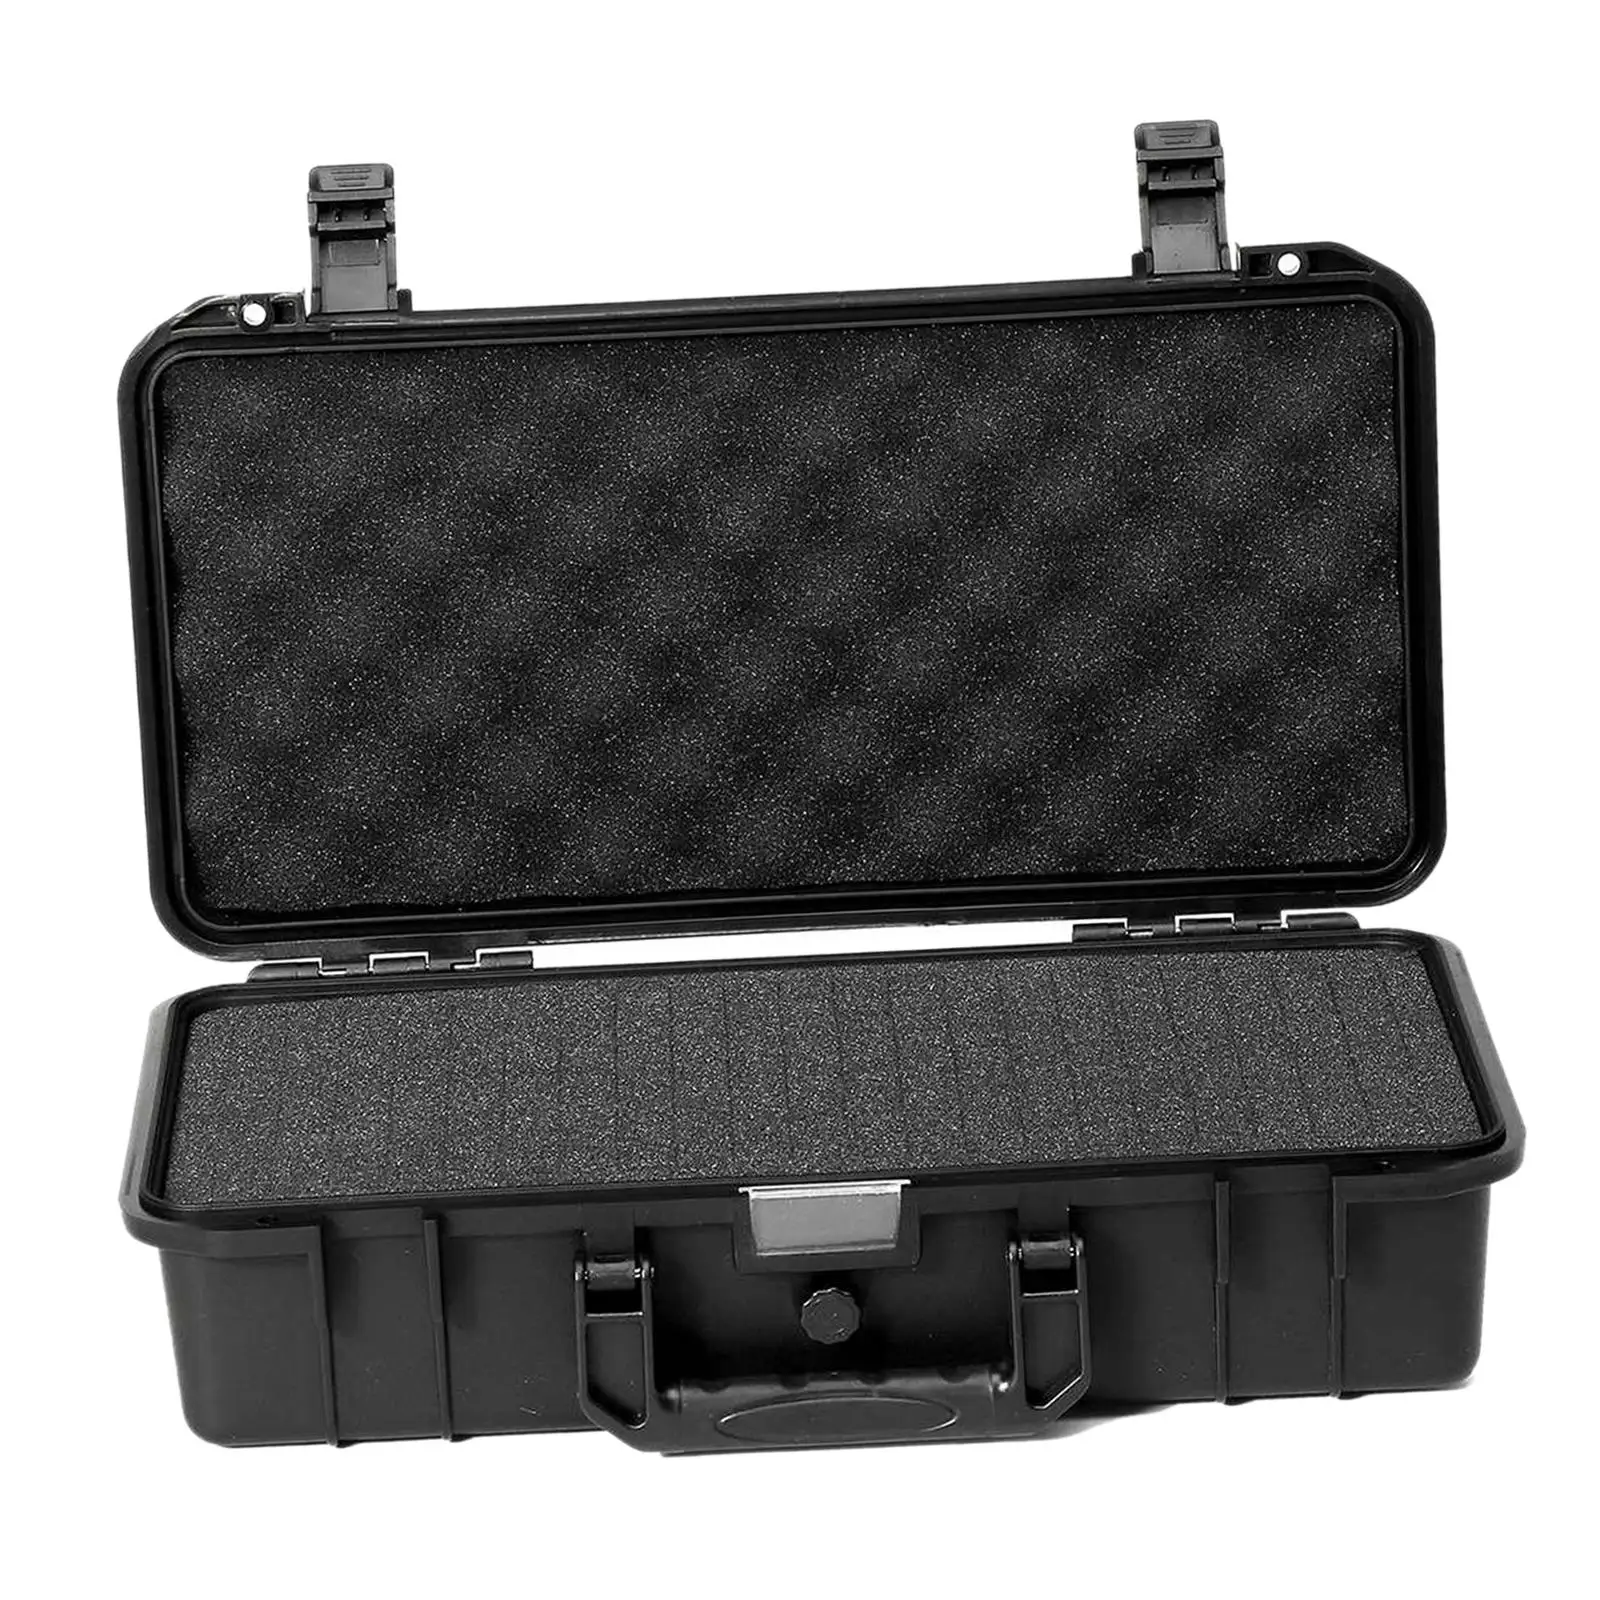 Portable Protective Toolbox Wear-Resistant Lockable Plastic with Sponge Sealed Shockproof Lightweight Storage Box for Hone